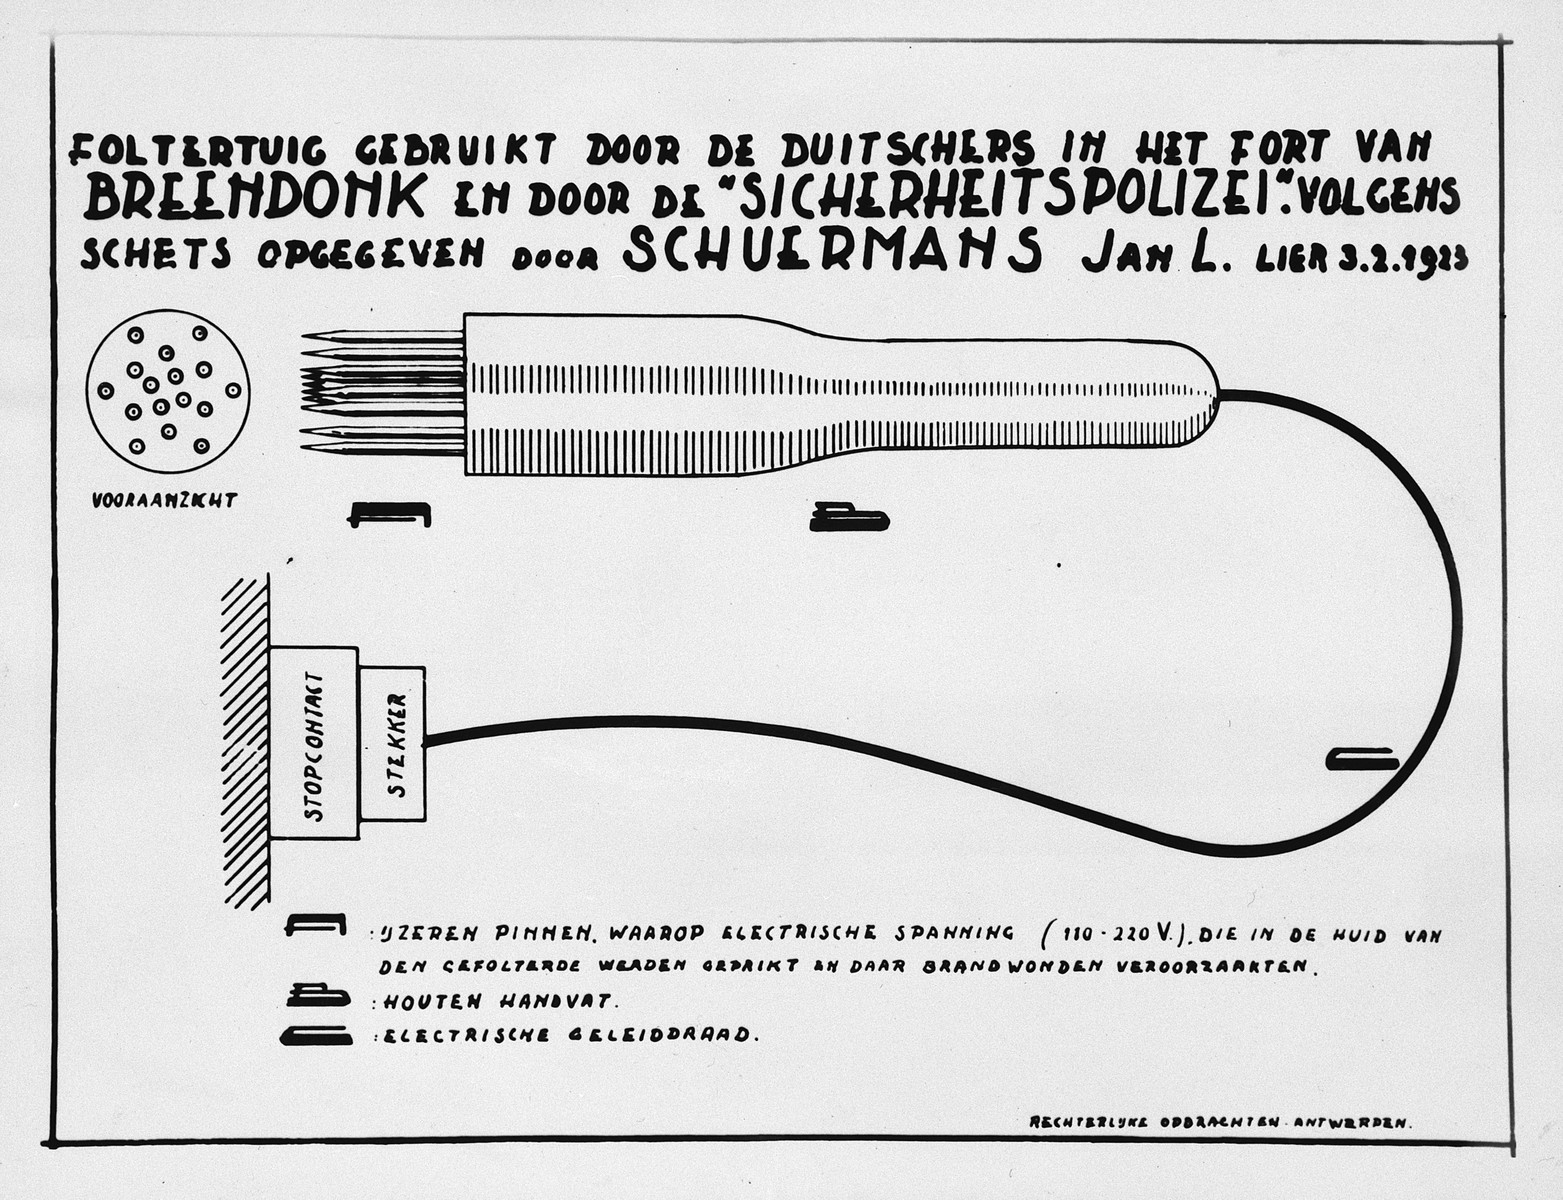 Illustration of one of the torture devices used in Breendonck.